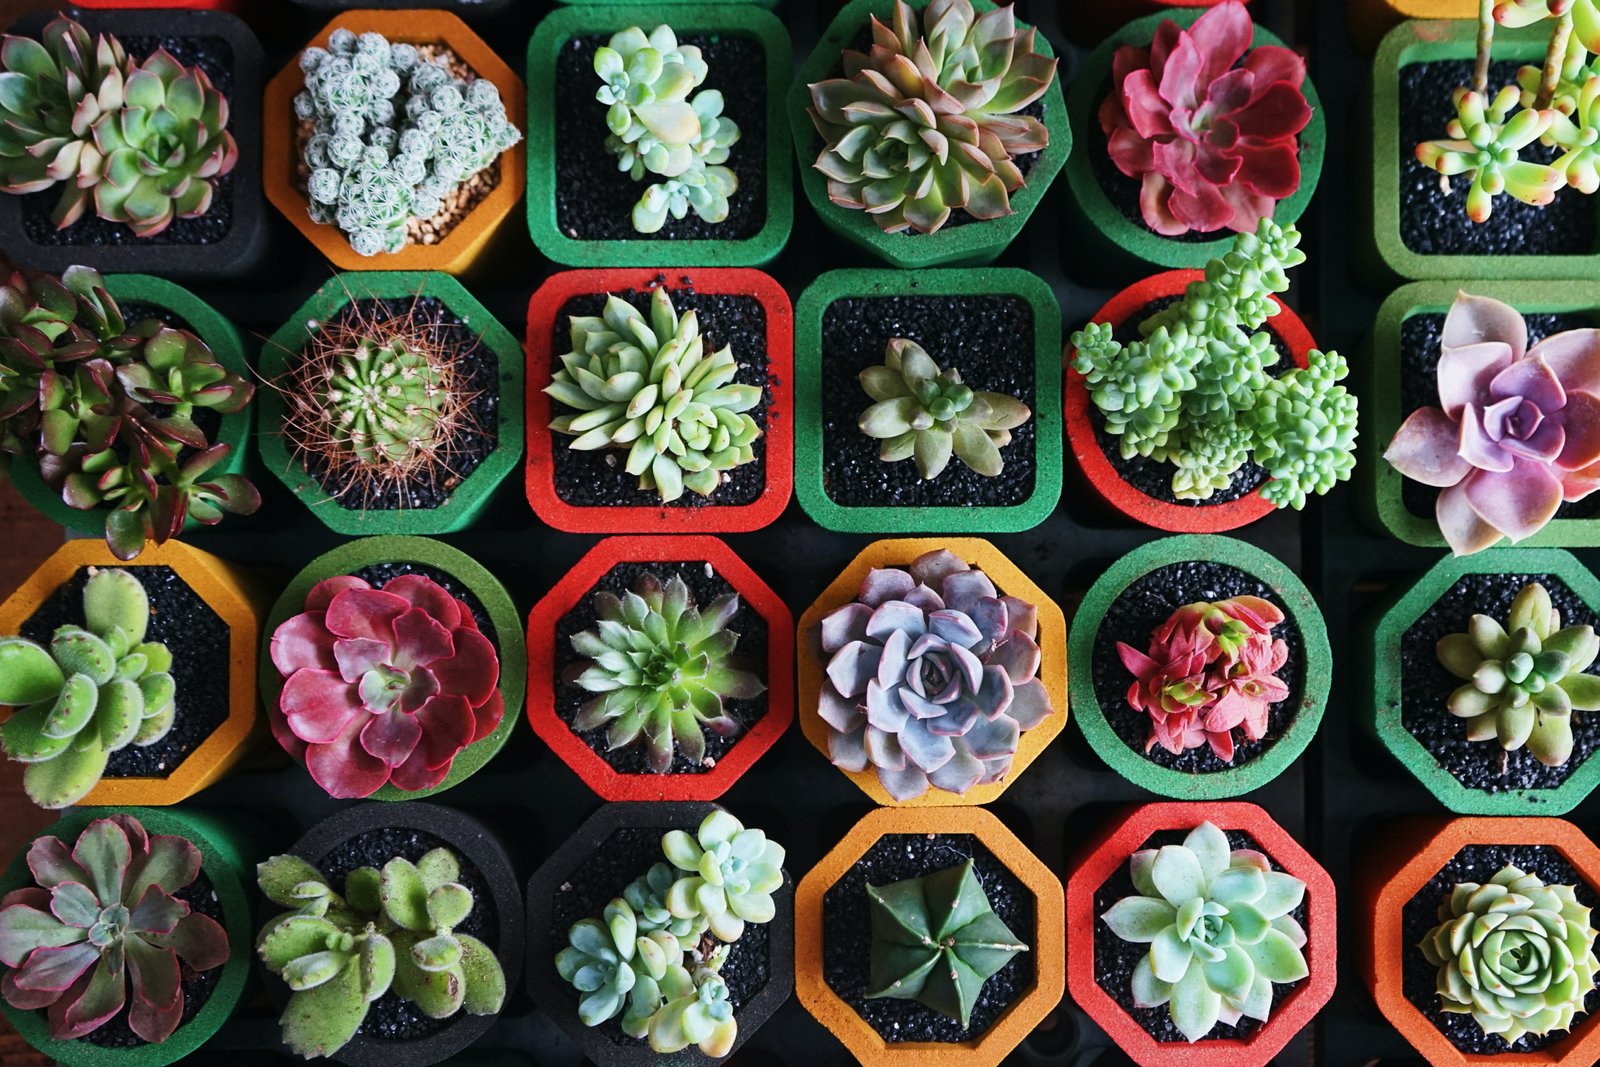 How to propagate succulents